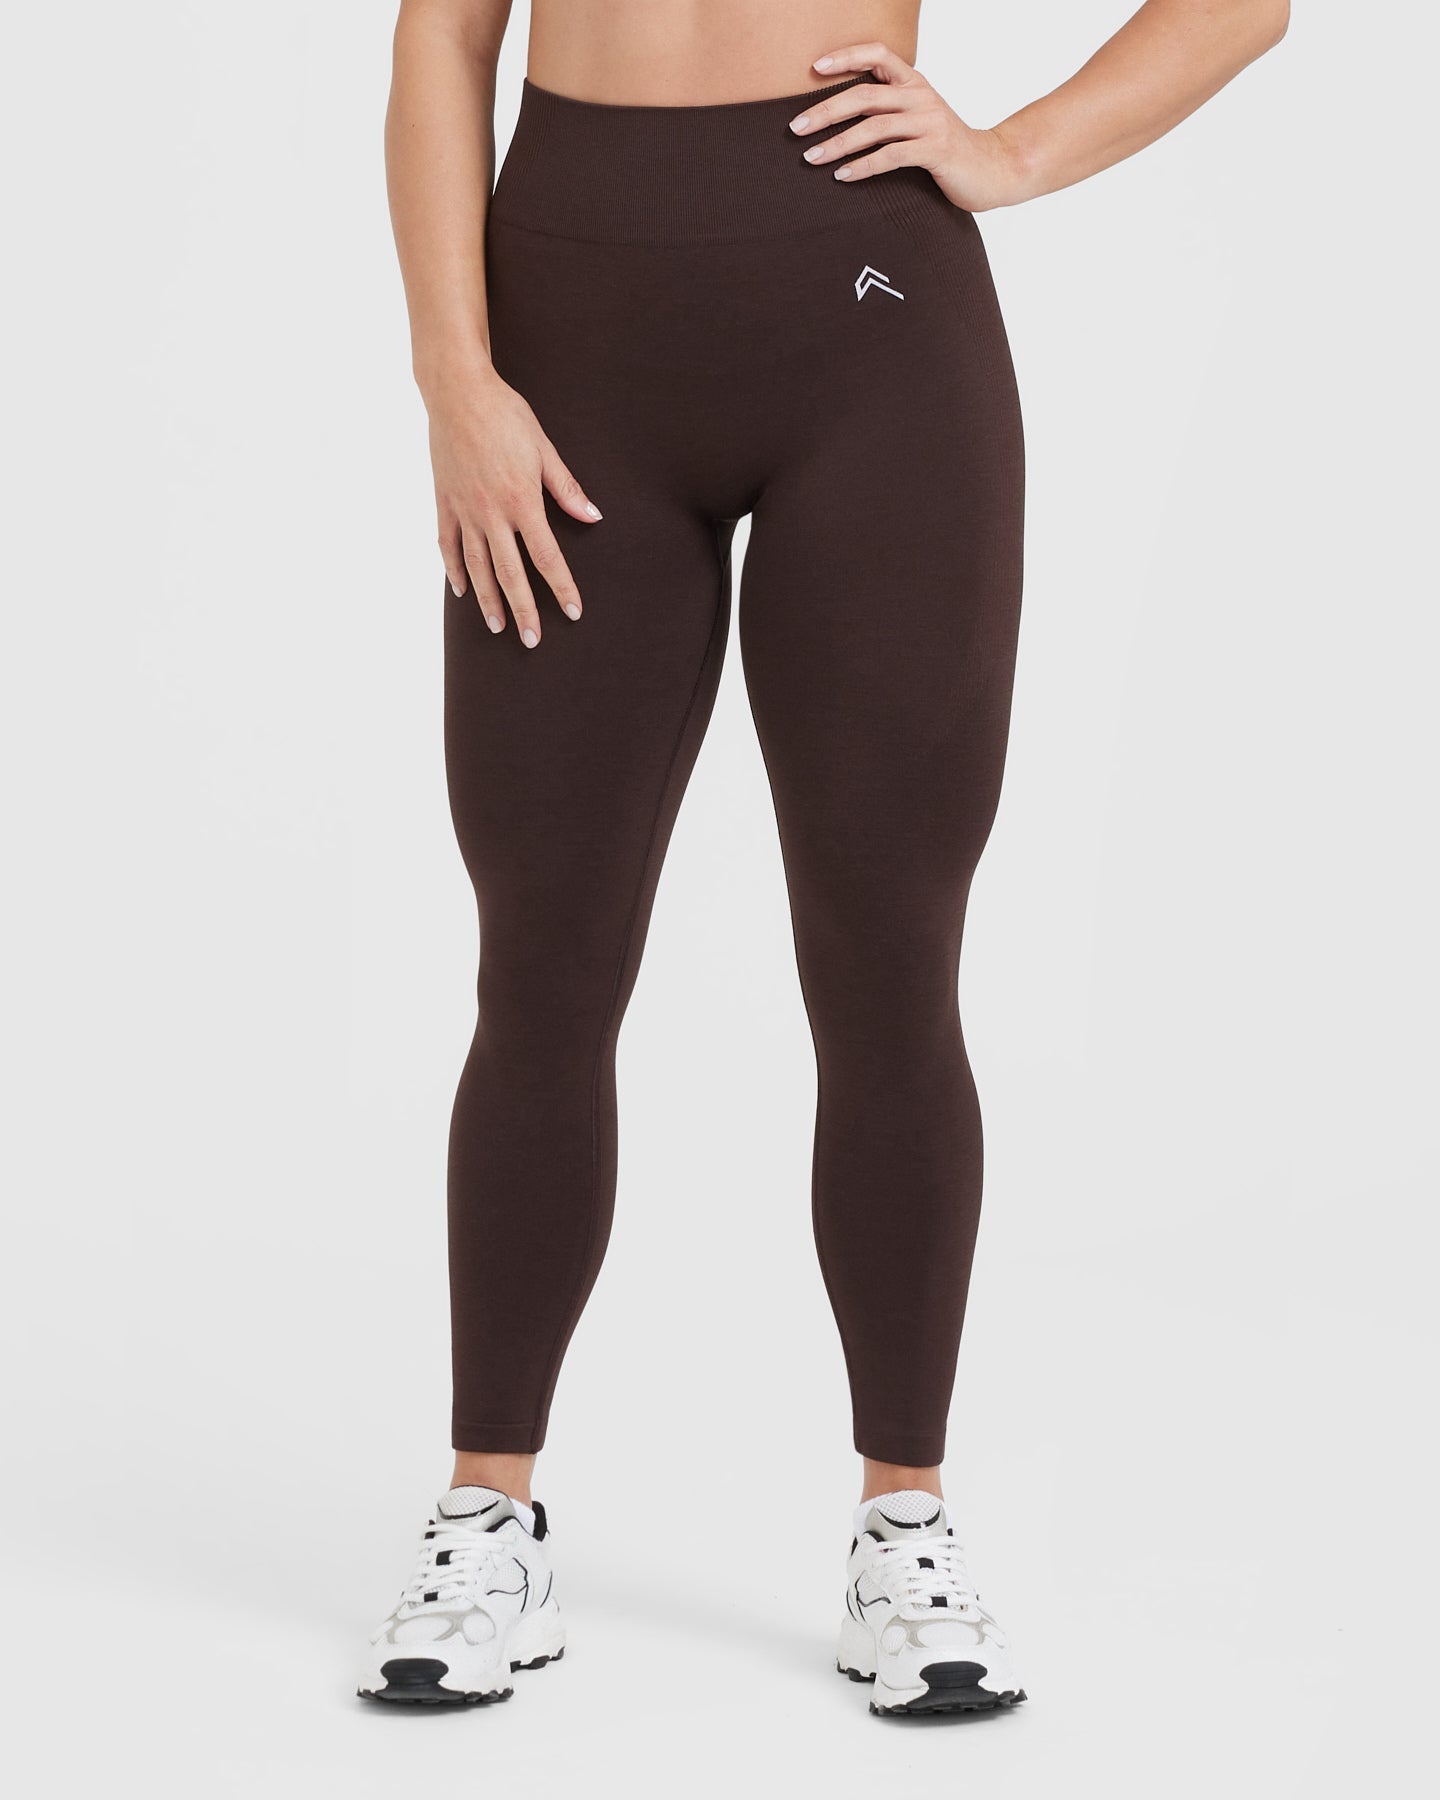 Classic Seamless 2.0 Active 70% Cocoa Oner Marl | Leggings US